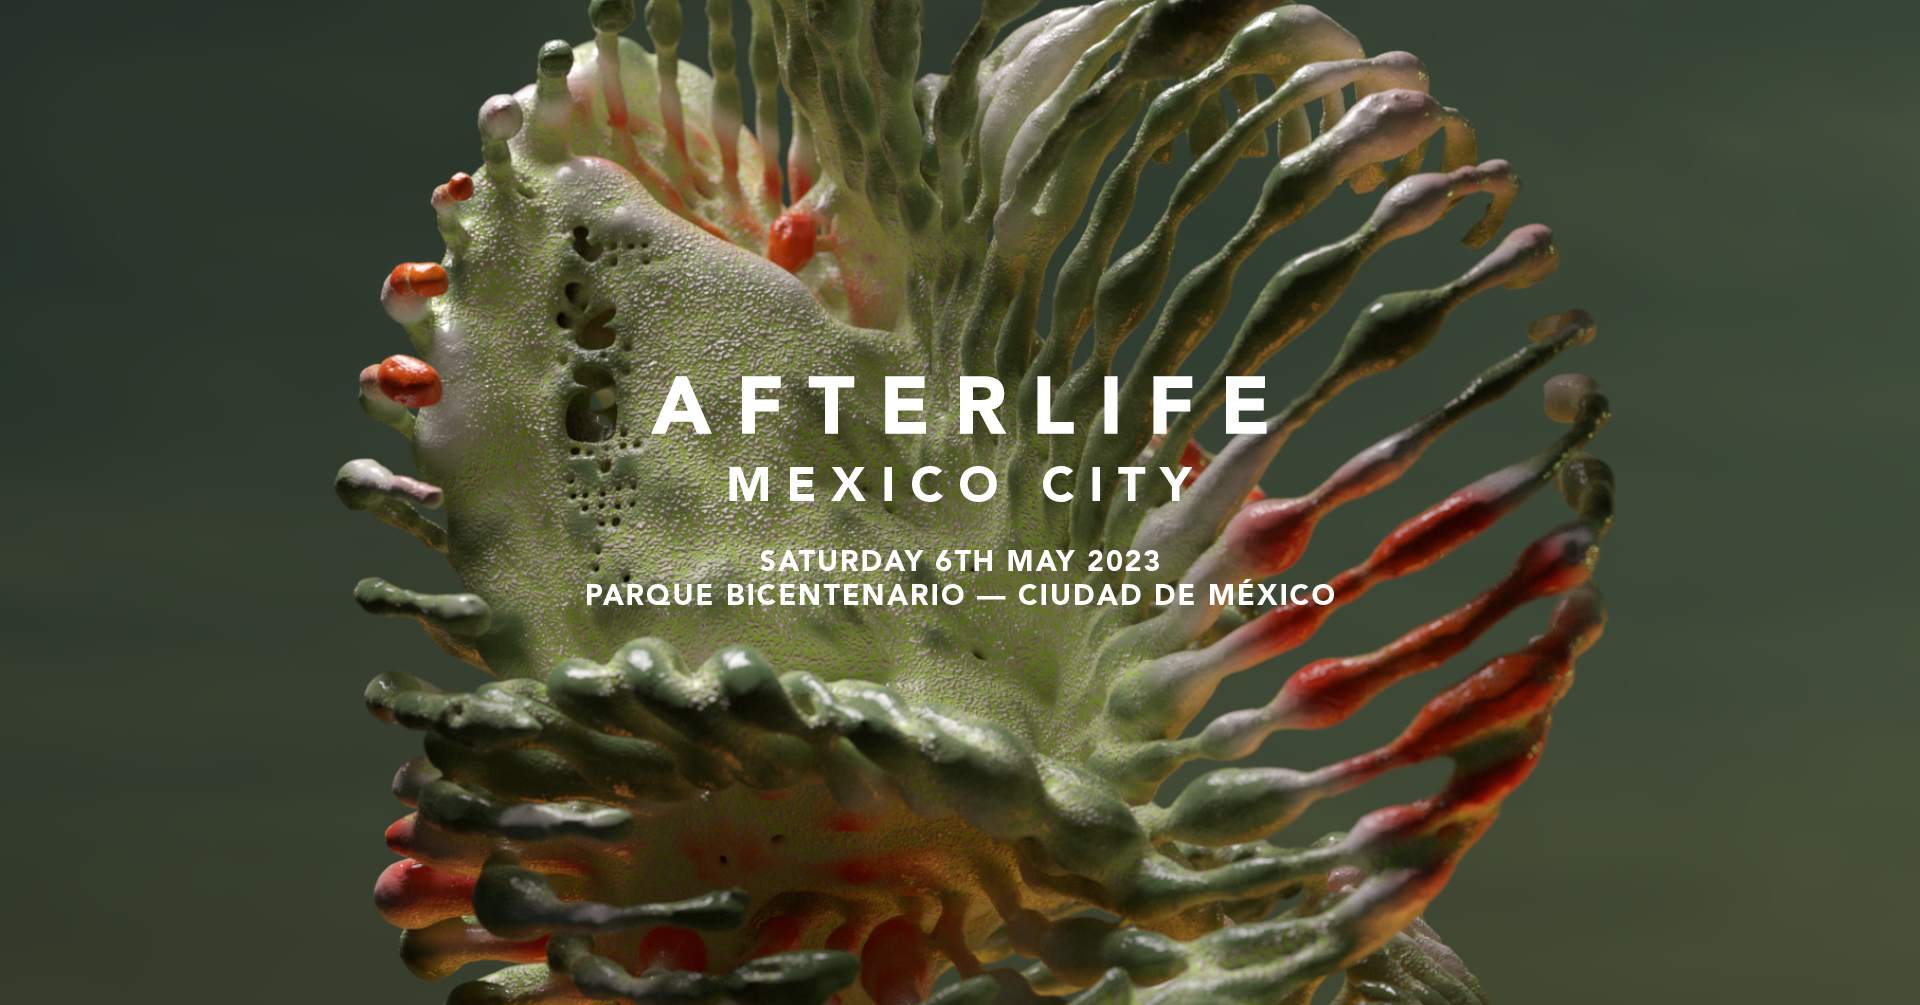 Afterlife Mexico City 2023 - フライヤー表